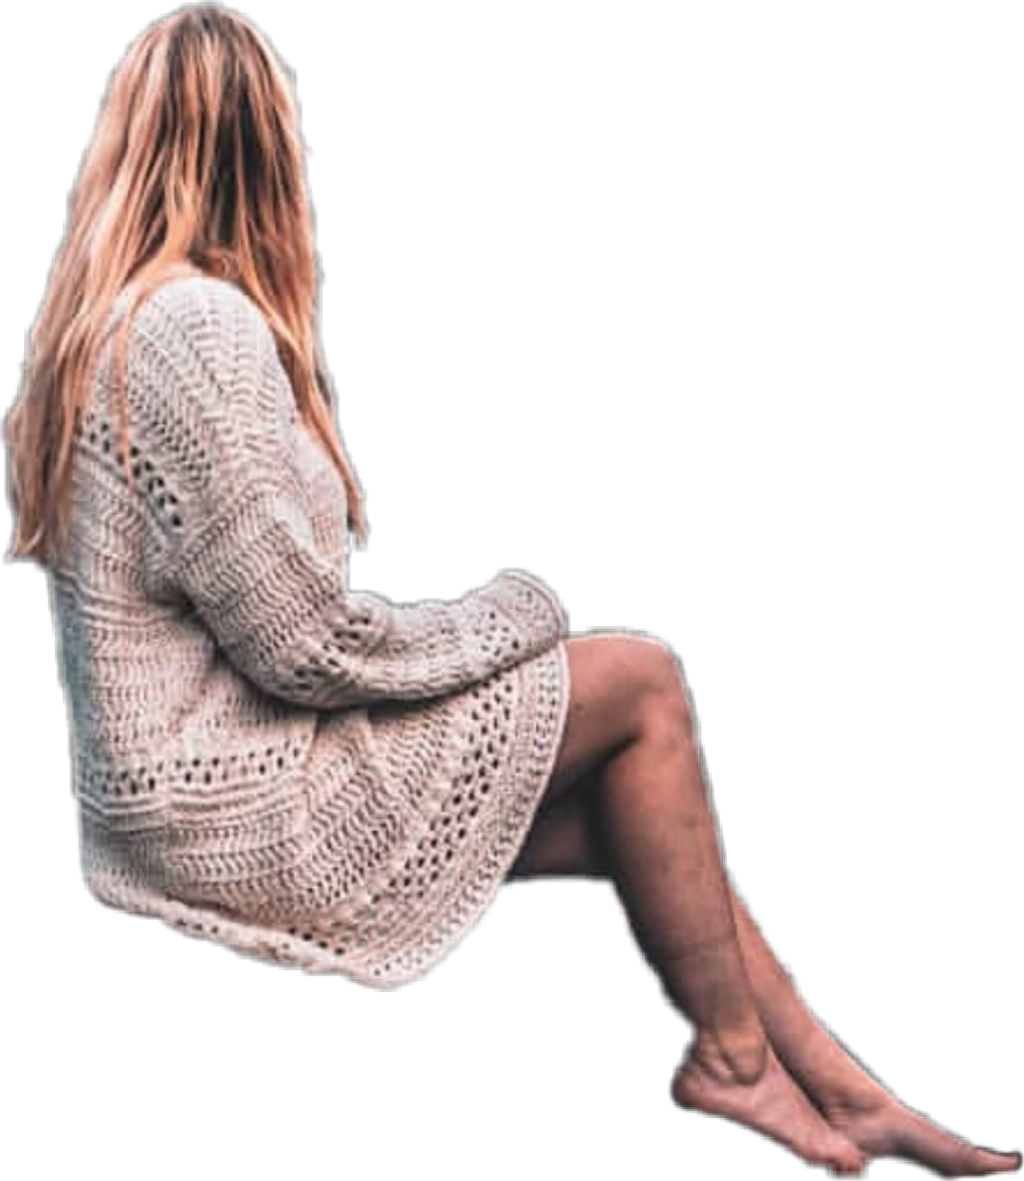 Woman Sittingin Knitted Sweater PNG image